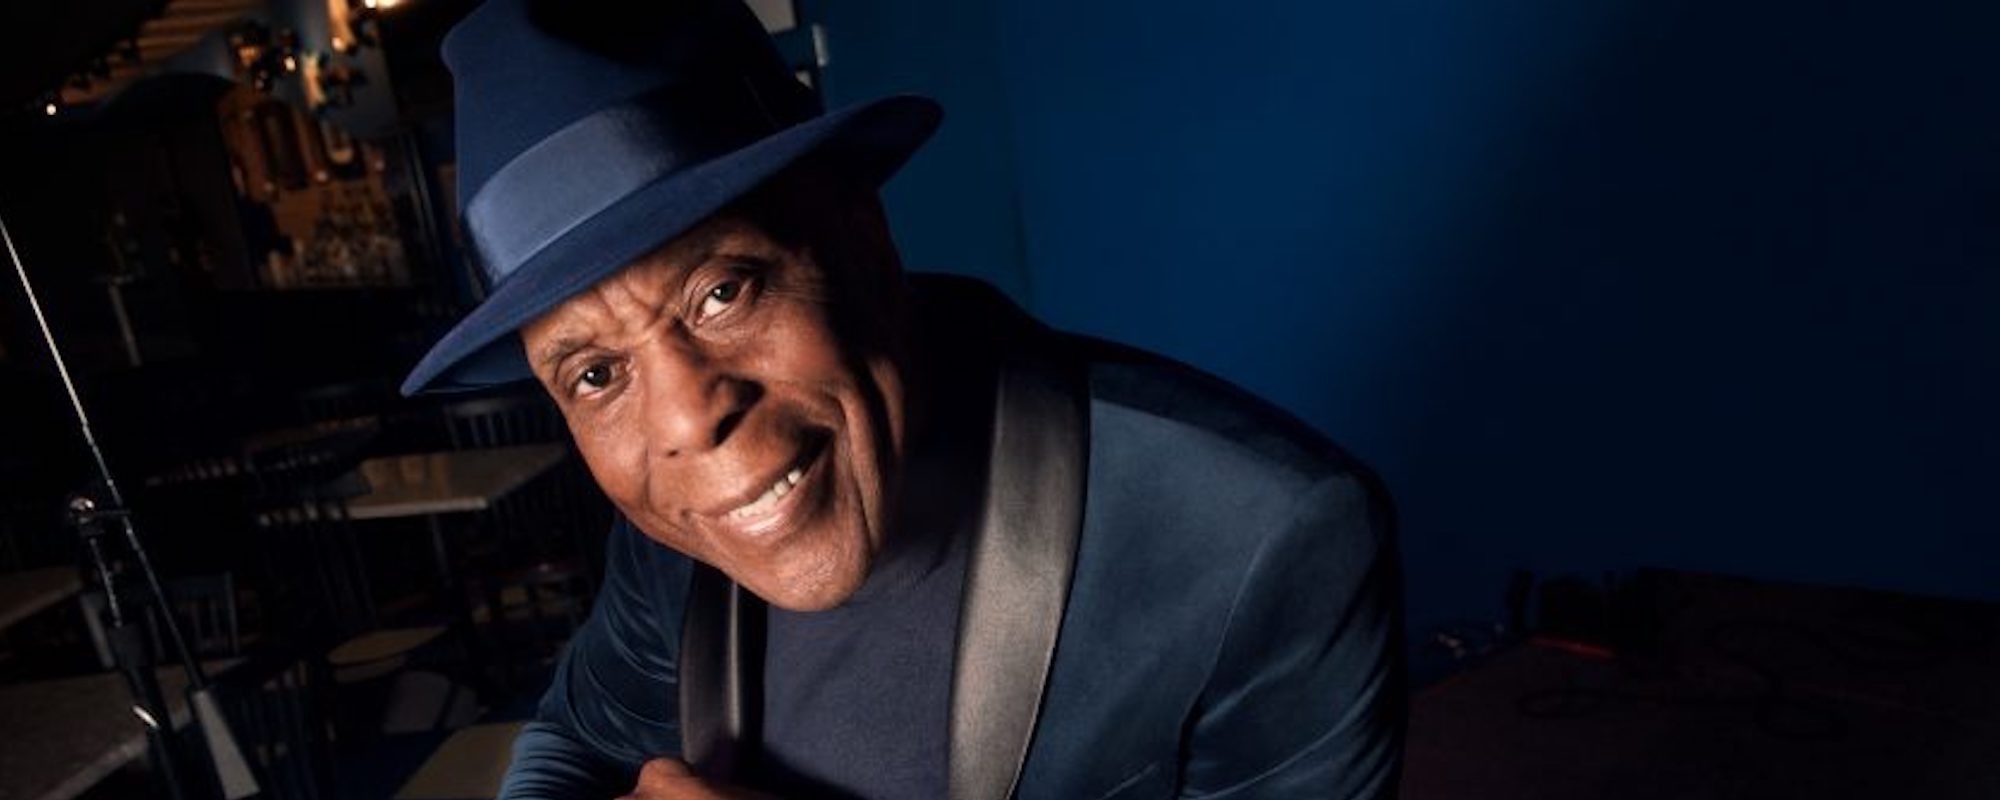 Buddy Guy to Future Generations: “Please, Don’t Let the Blues Die”